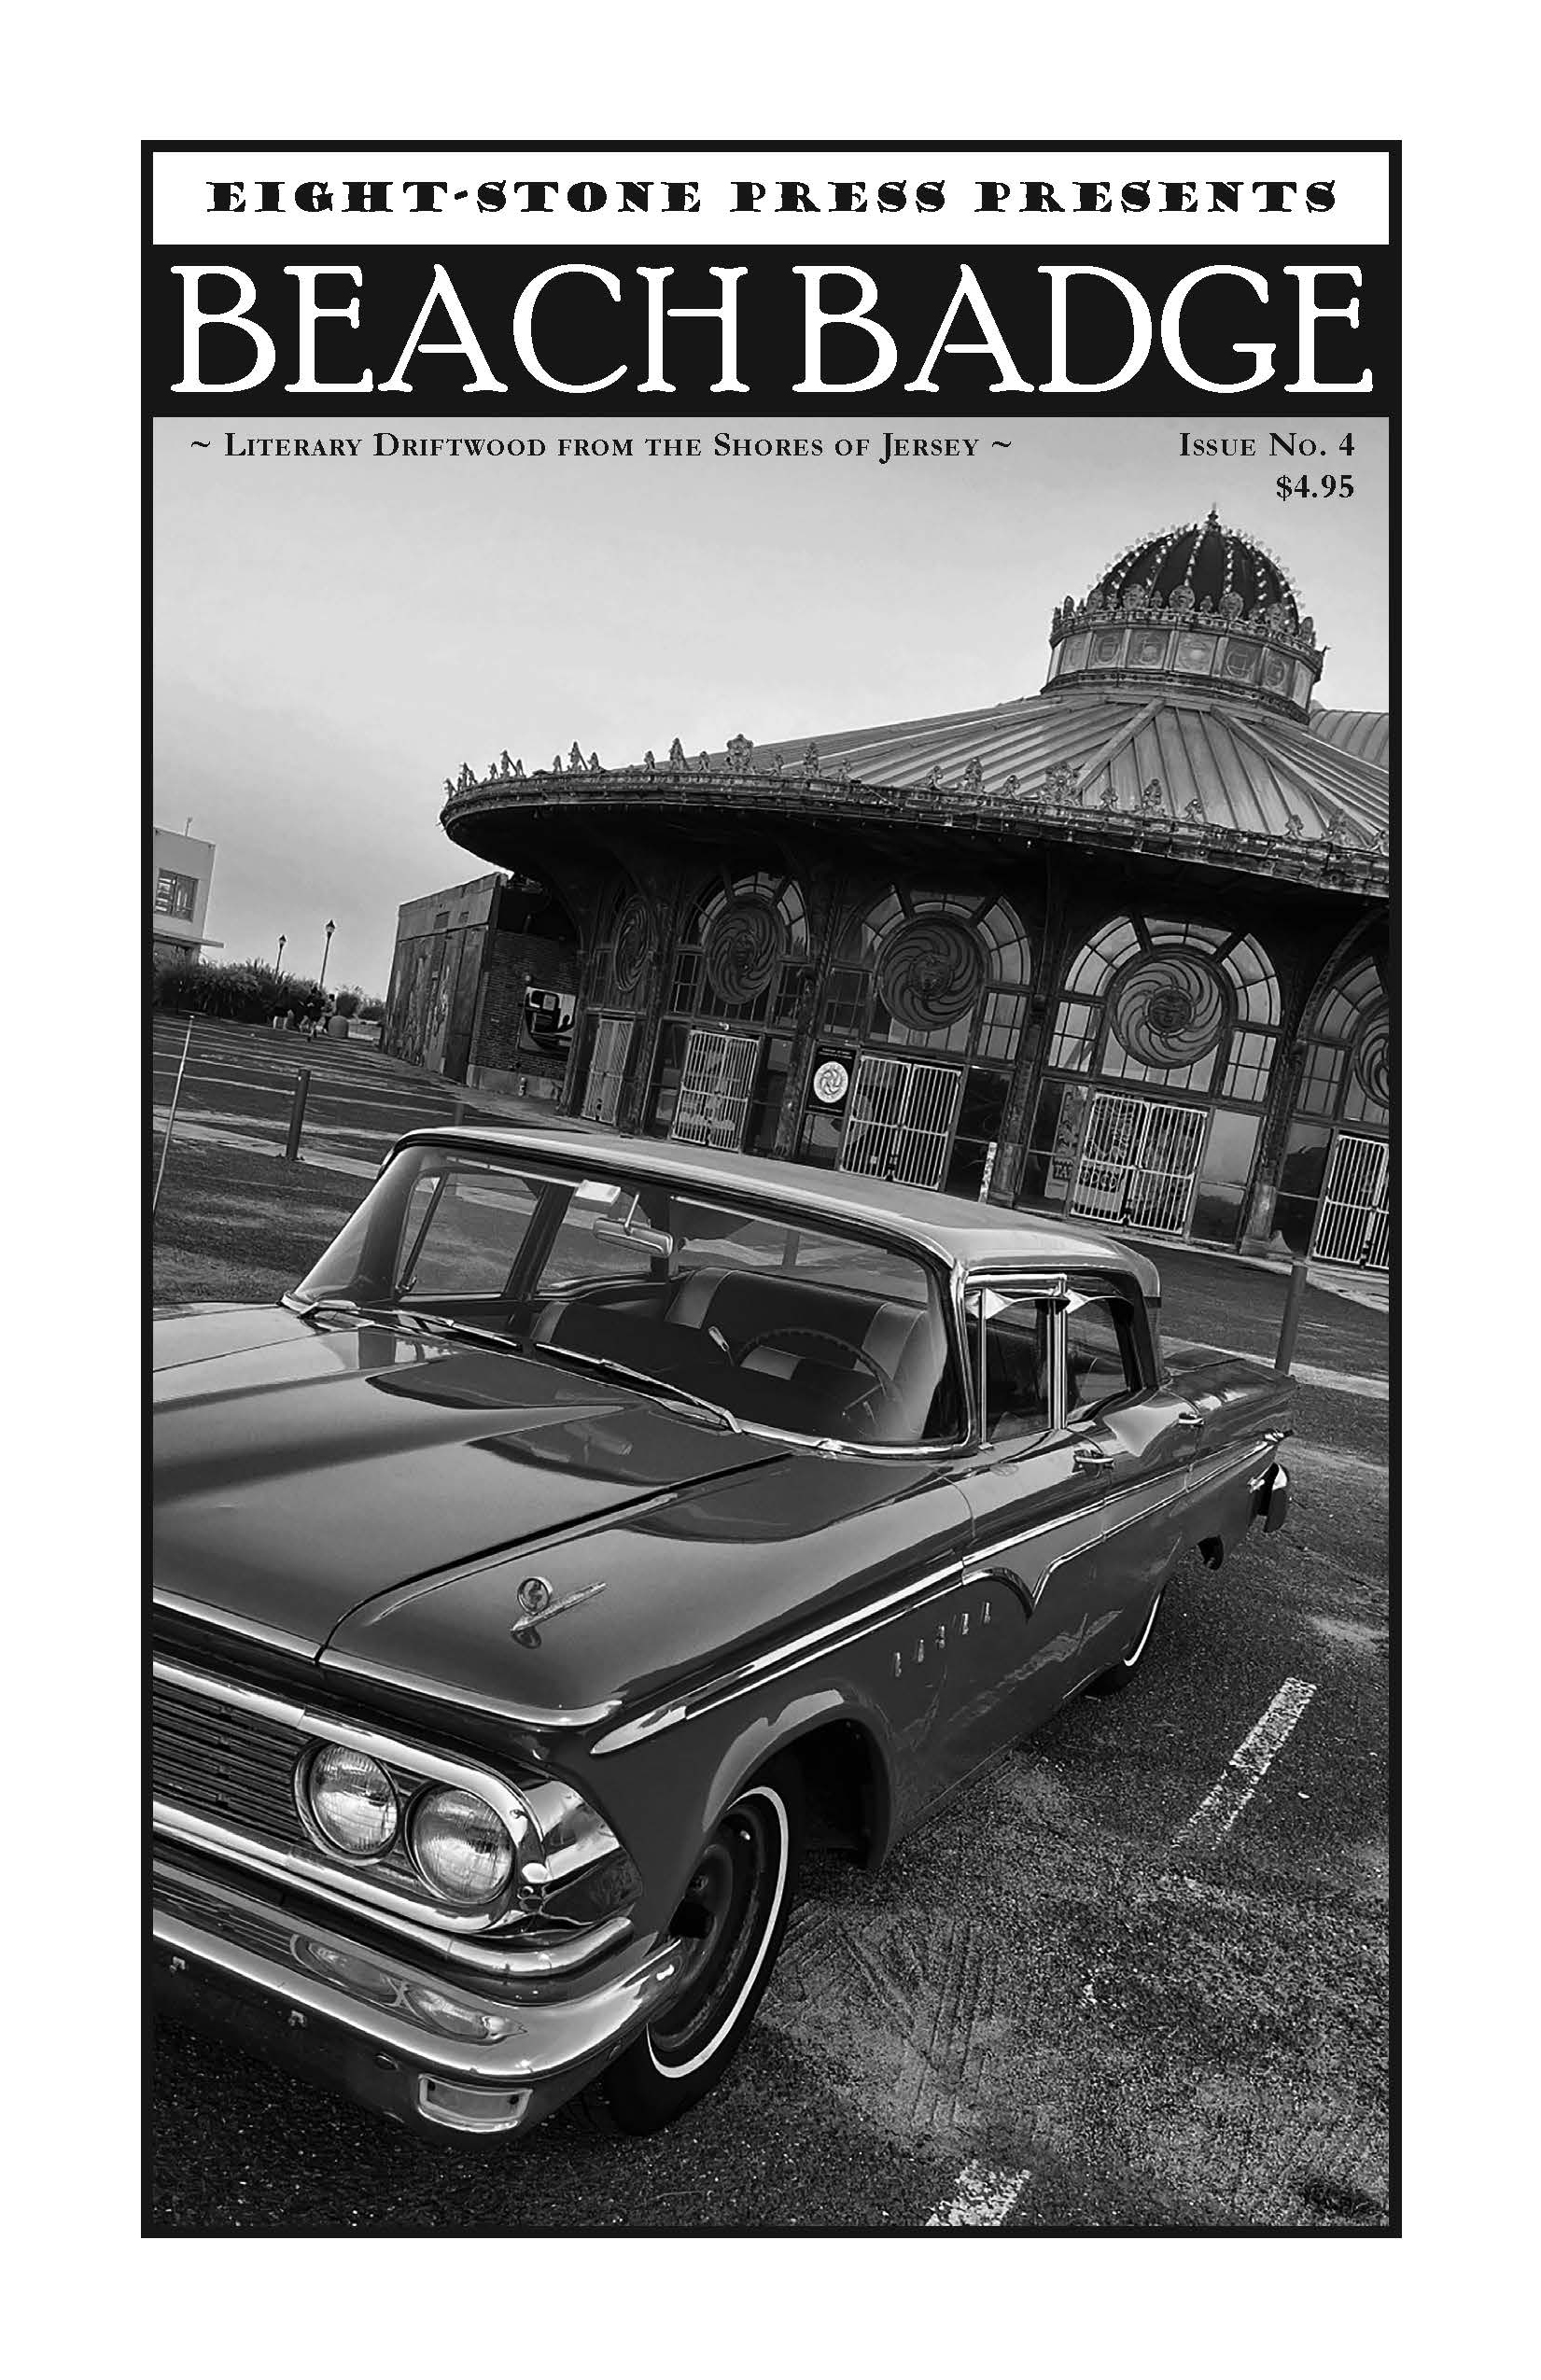 Beach Badge #4 Cover. Shows old car in Asbury Park